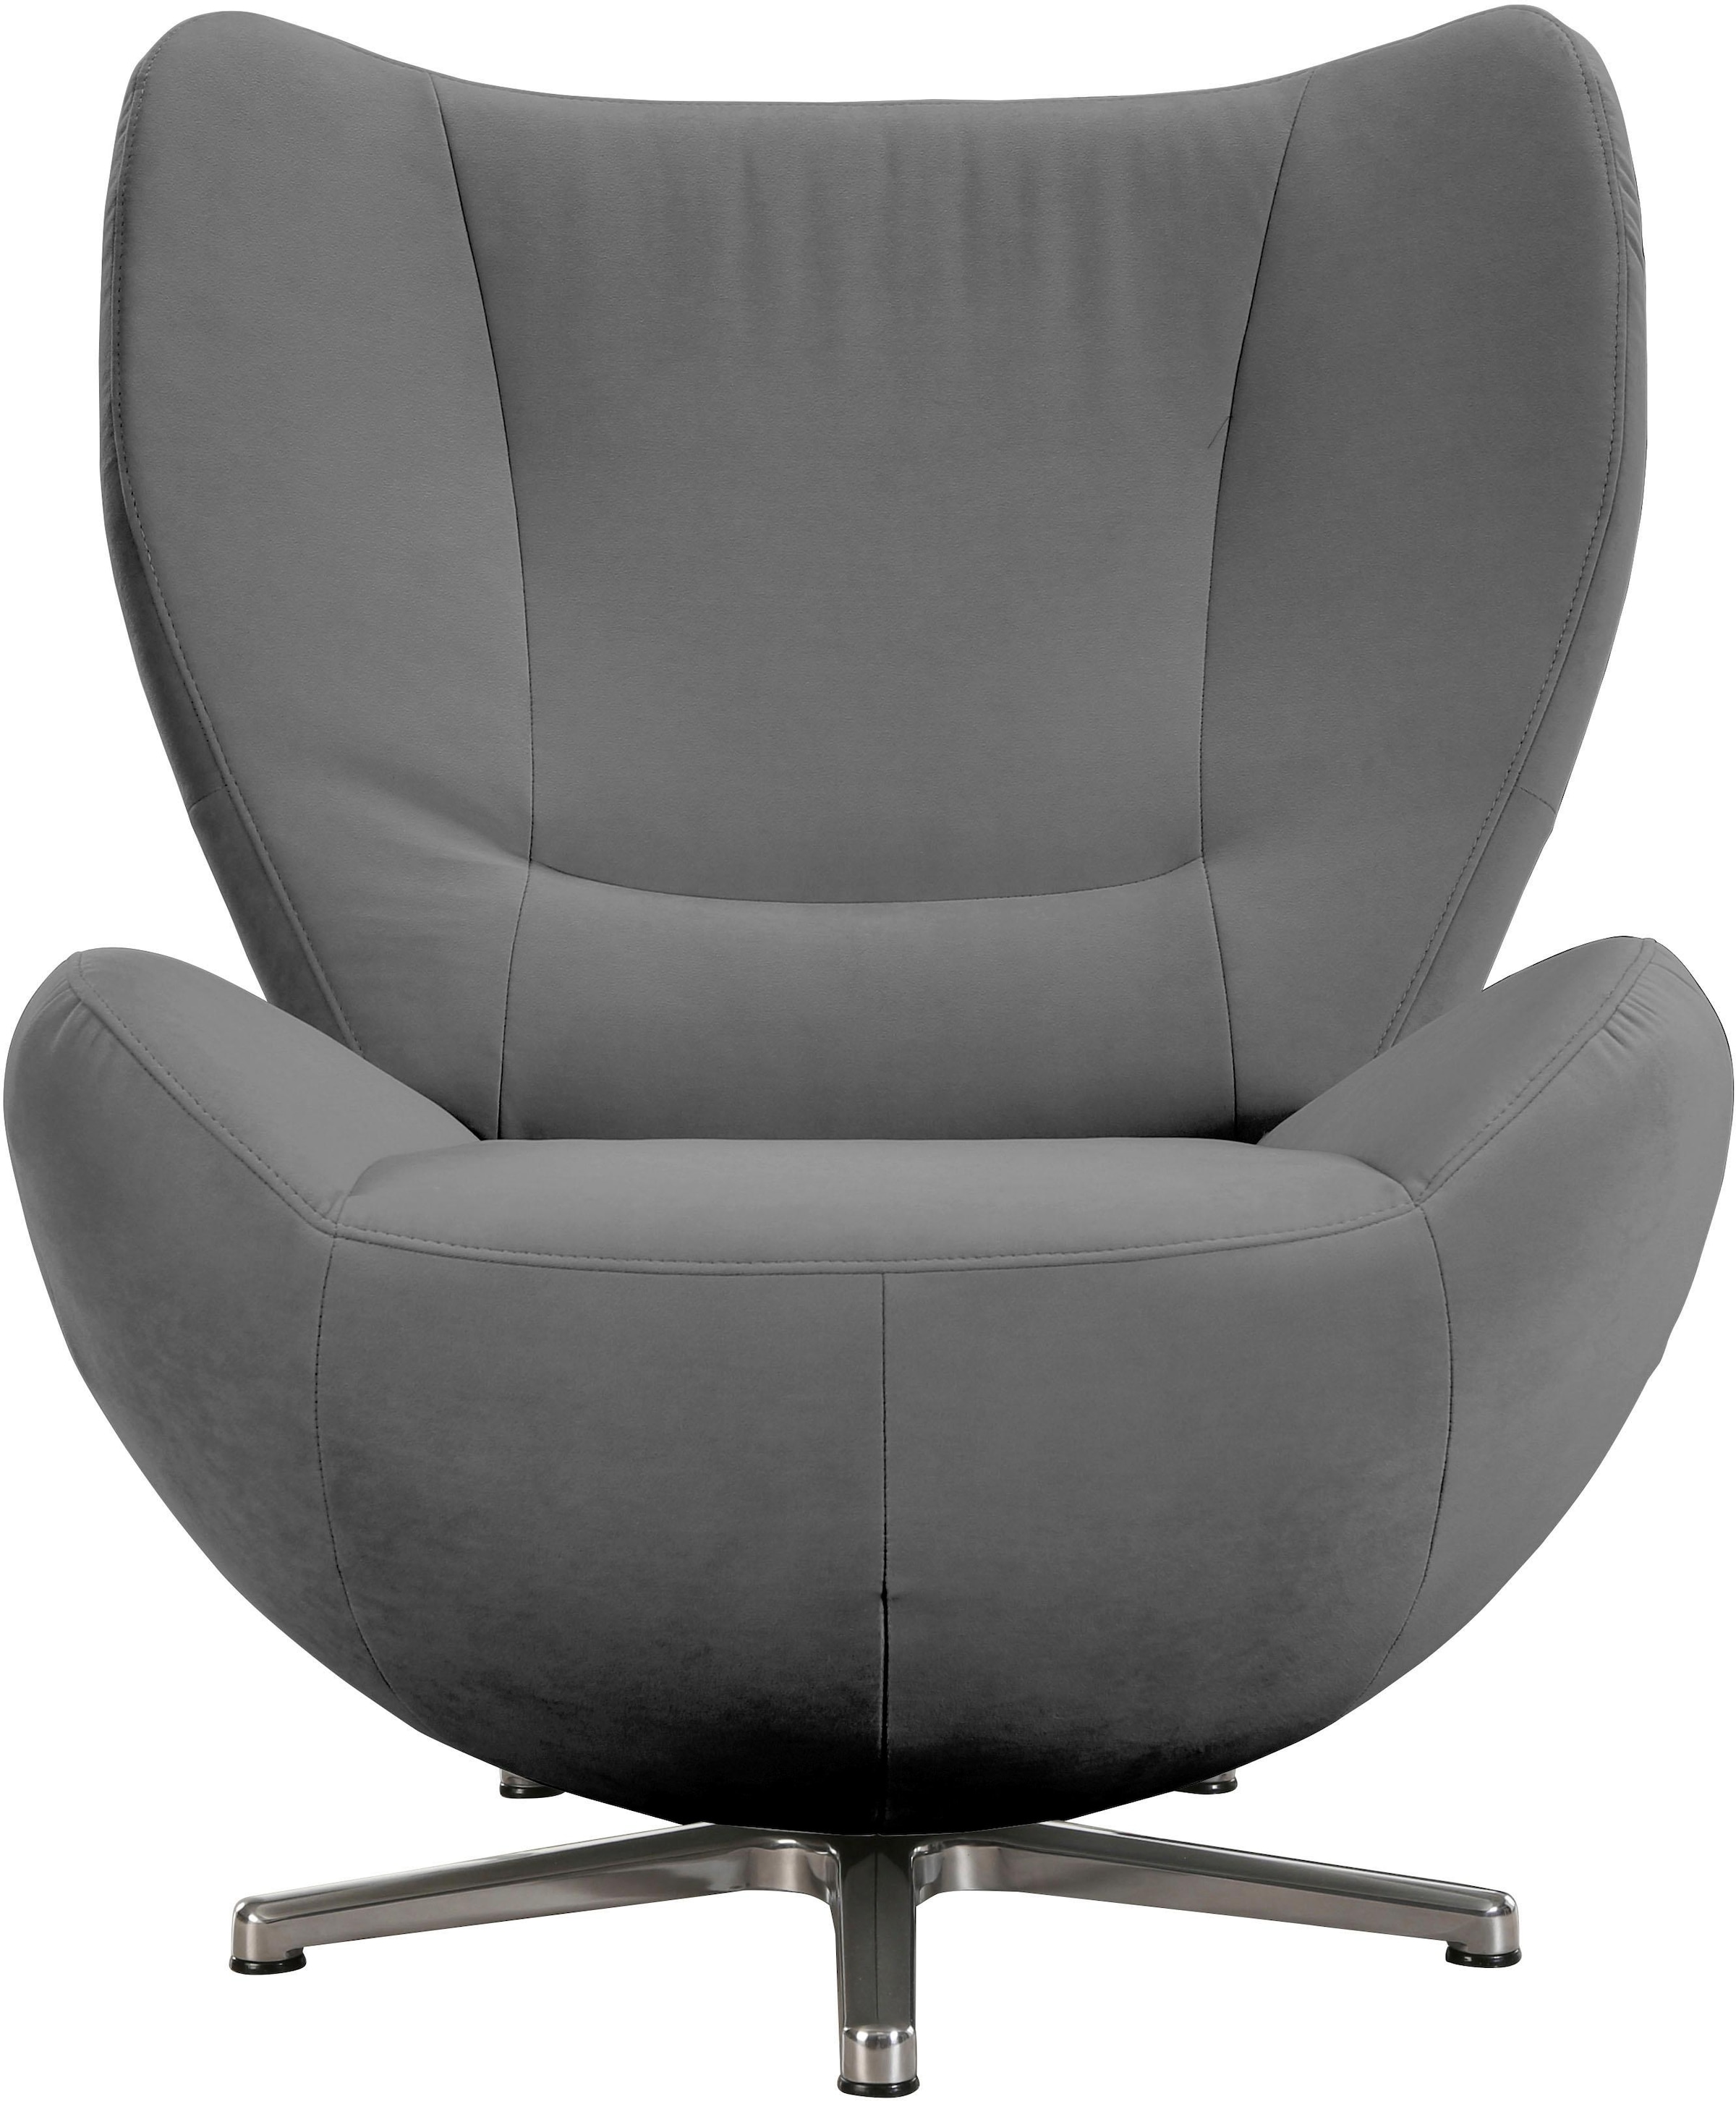 TOM TAILOR HOME Loungesessel »TOM BAUR PURE«, | in Chrom Metall-Drehfuß mit